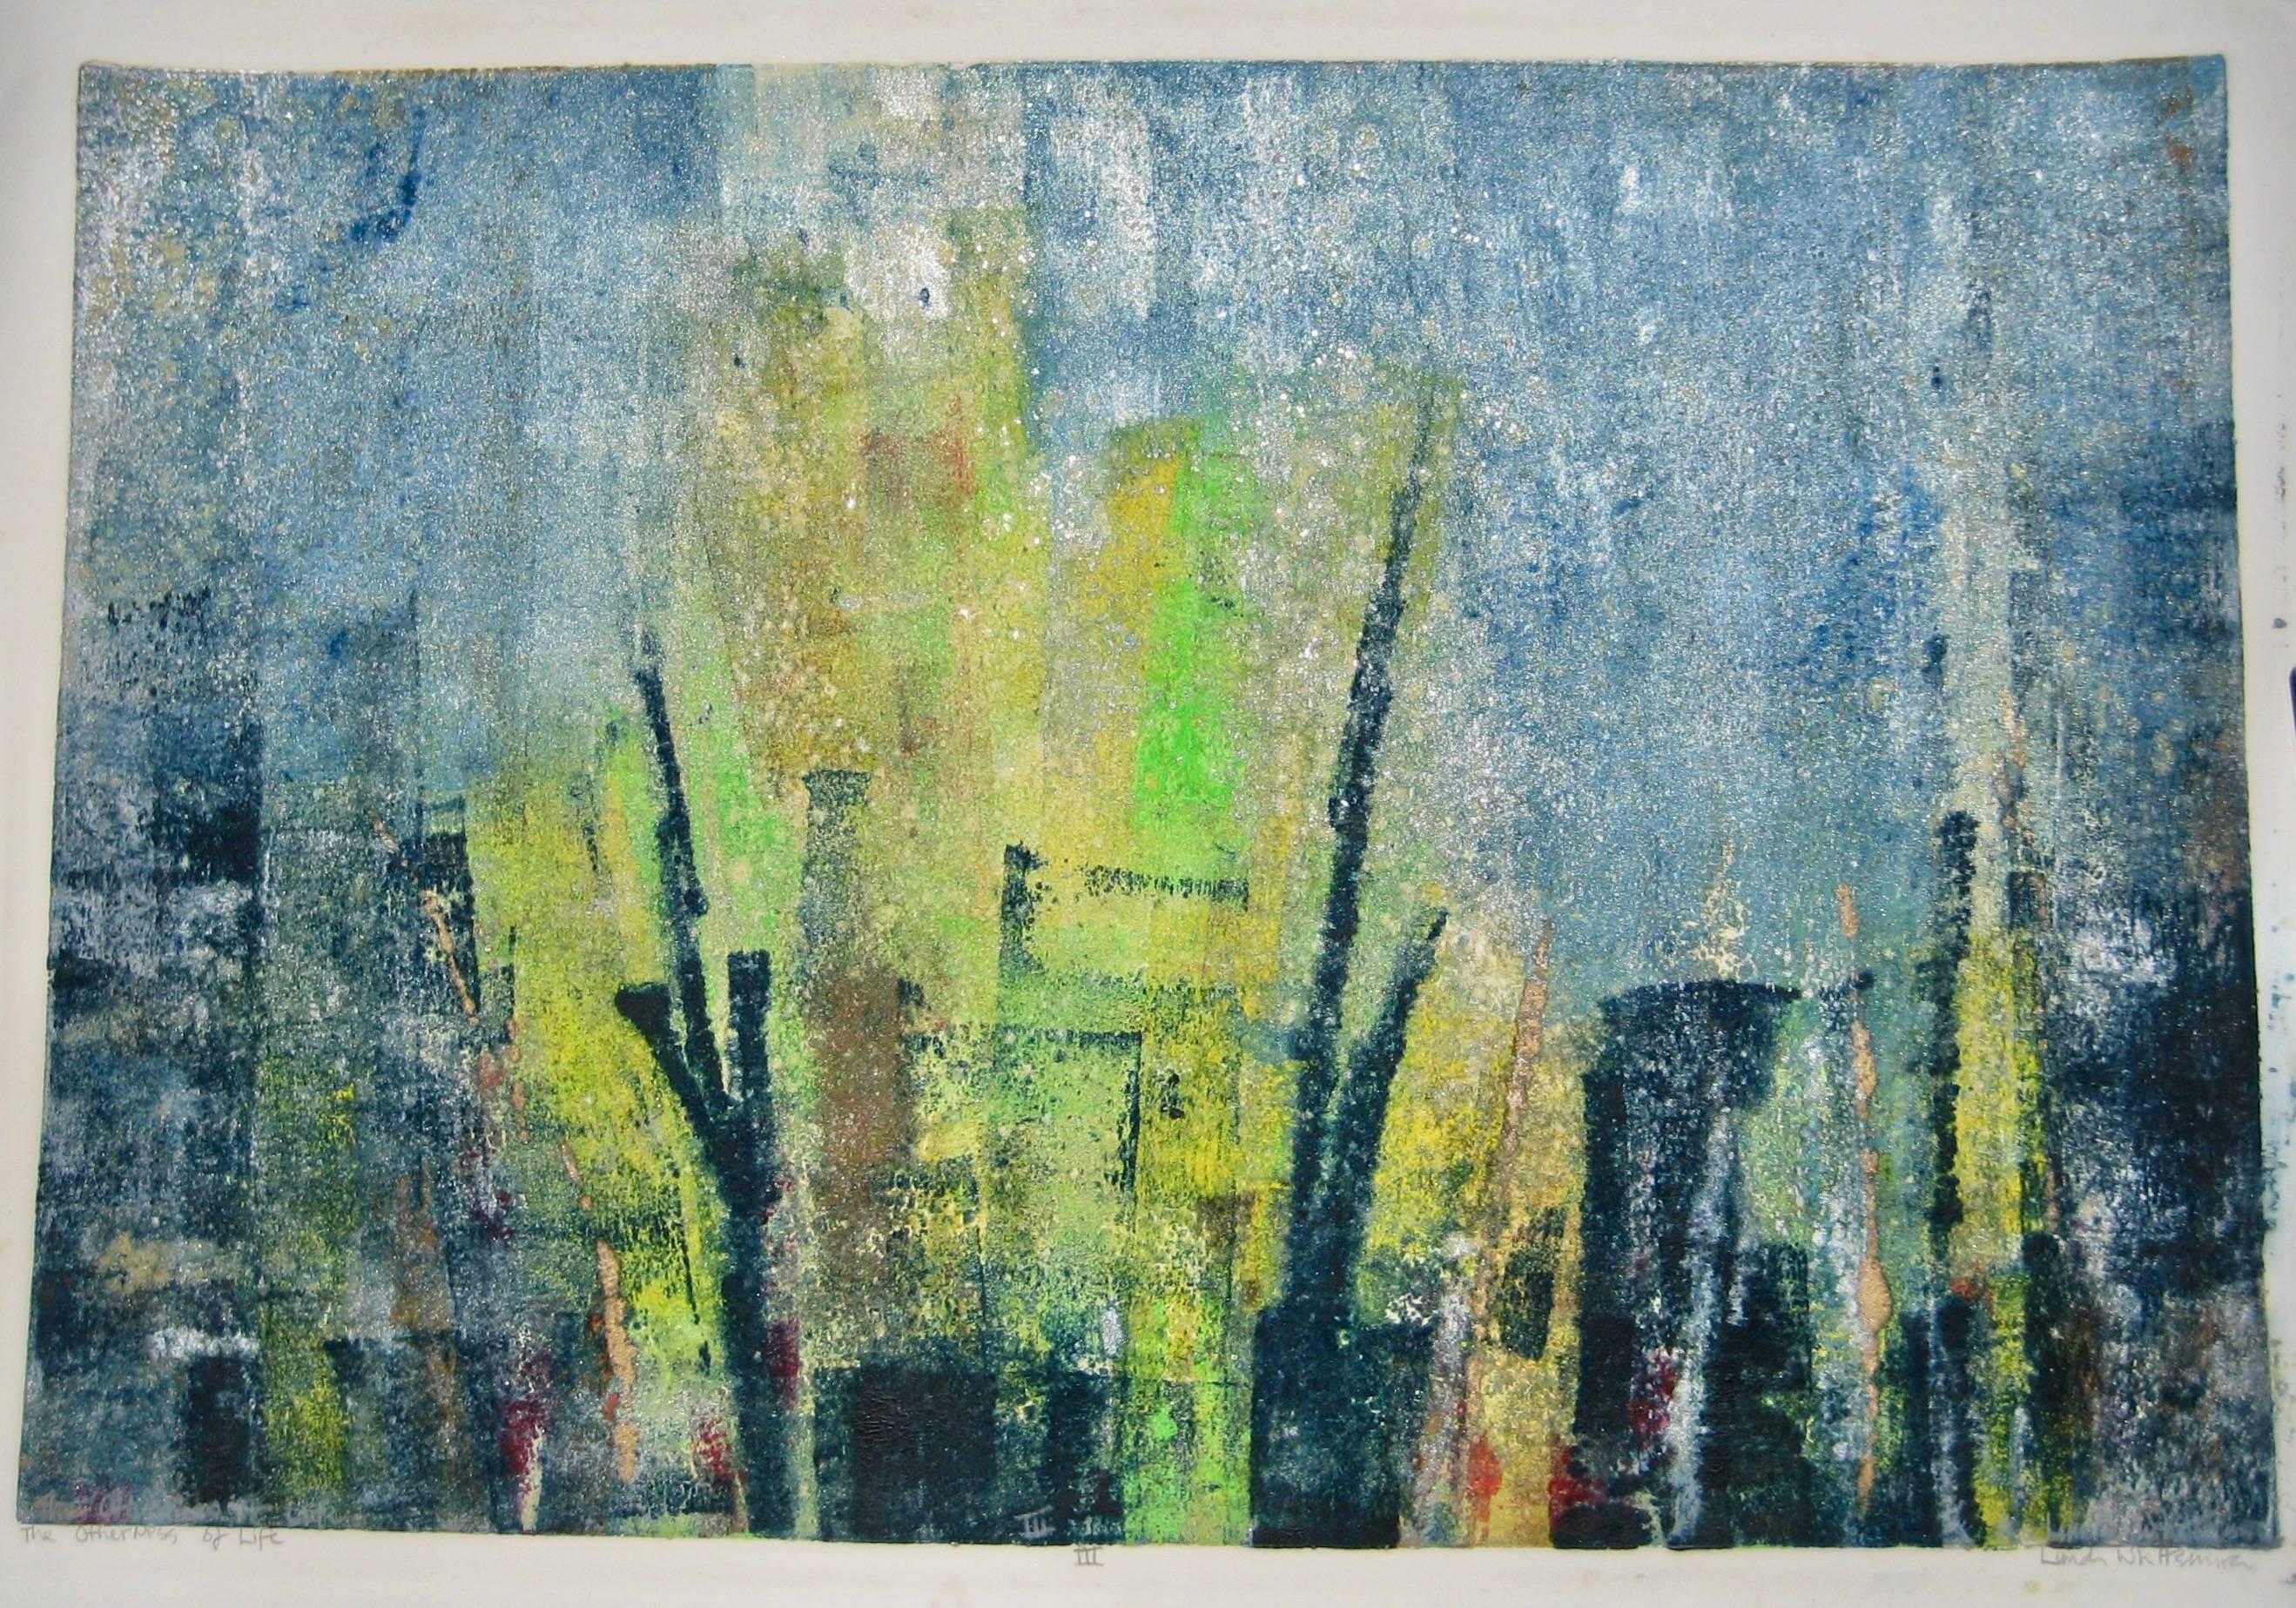 A full rich range of blues and greens are streaked with pearlescent accents that play across this dynamic abstract original work "The Otherness of Life III" by master print maker Linda Whittemore. This mixed media viscosity monotype displays all of